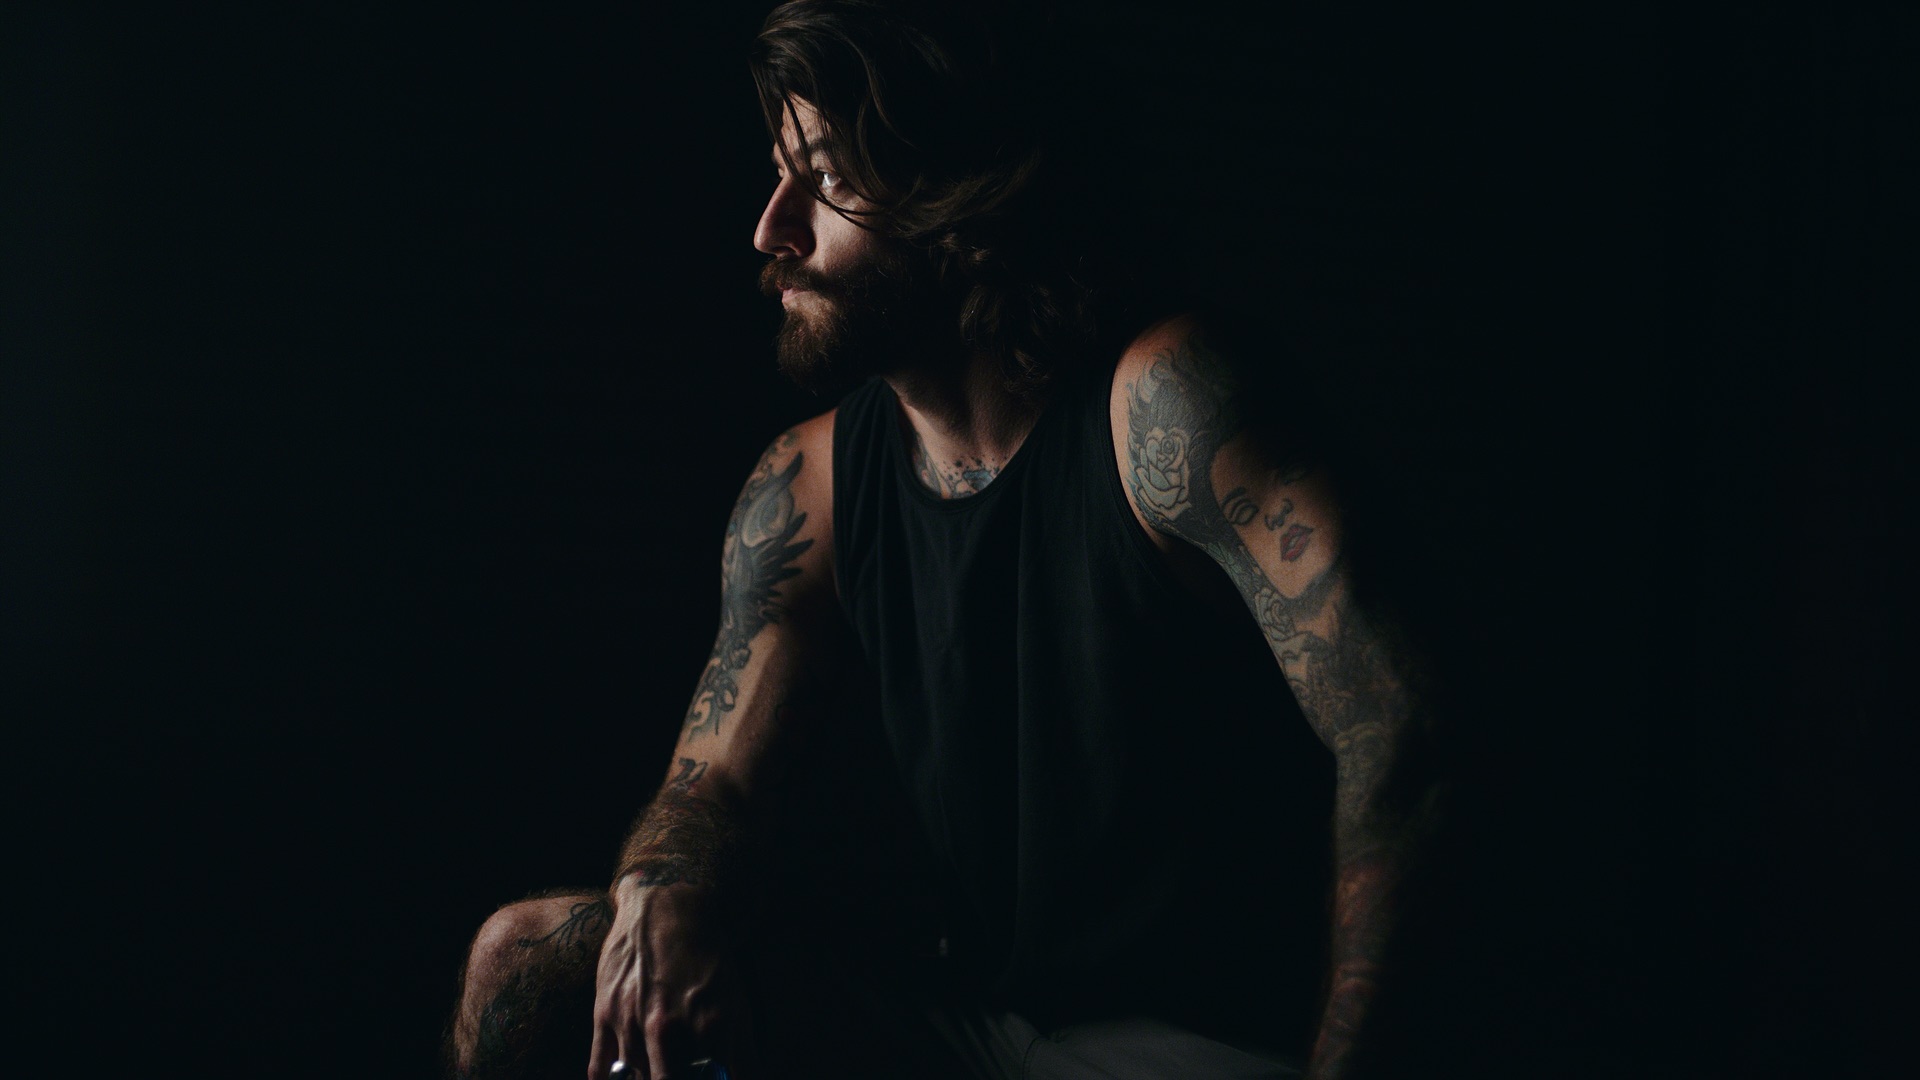 Luke Adams Crew Call the Tattoo Project Promo Man with beard and tattoos wearing a black tank top posing for the camera in semi darkness looking off to the side